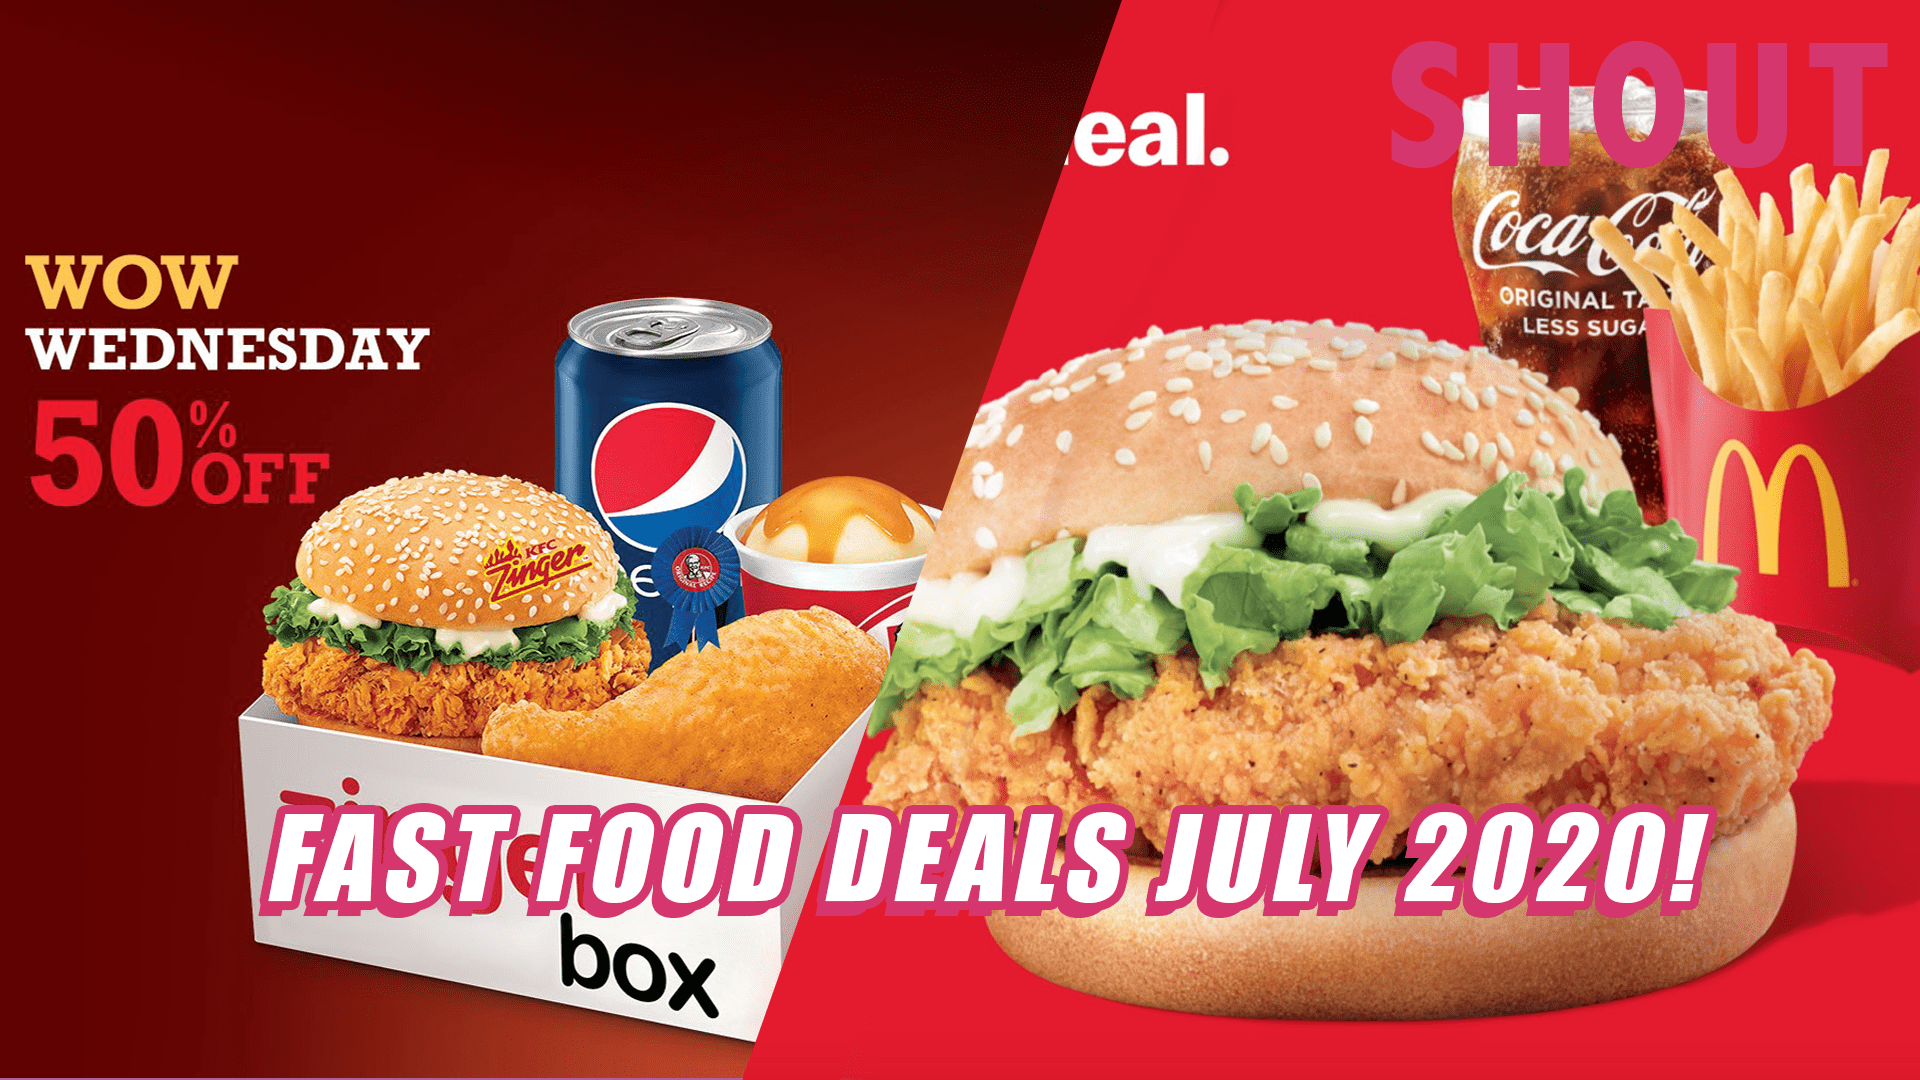 Fast Food Deals In July That You Shouldn’t Miss! Shout